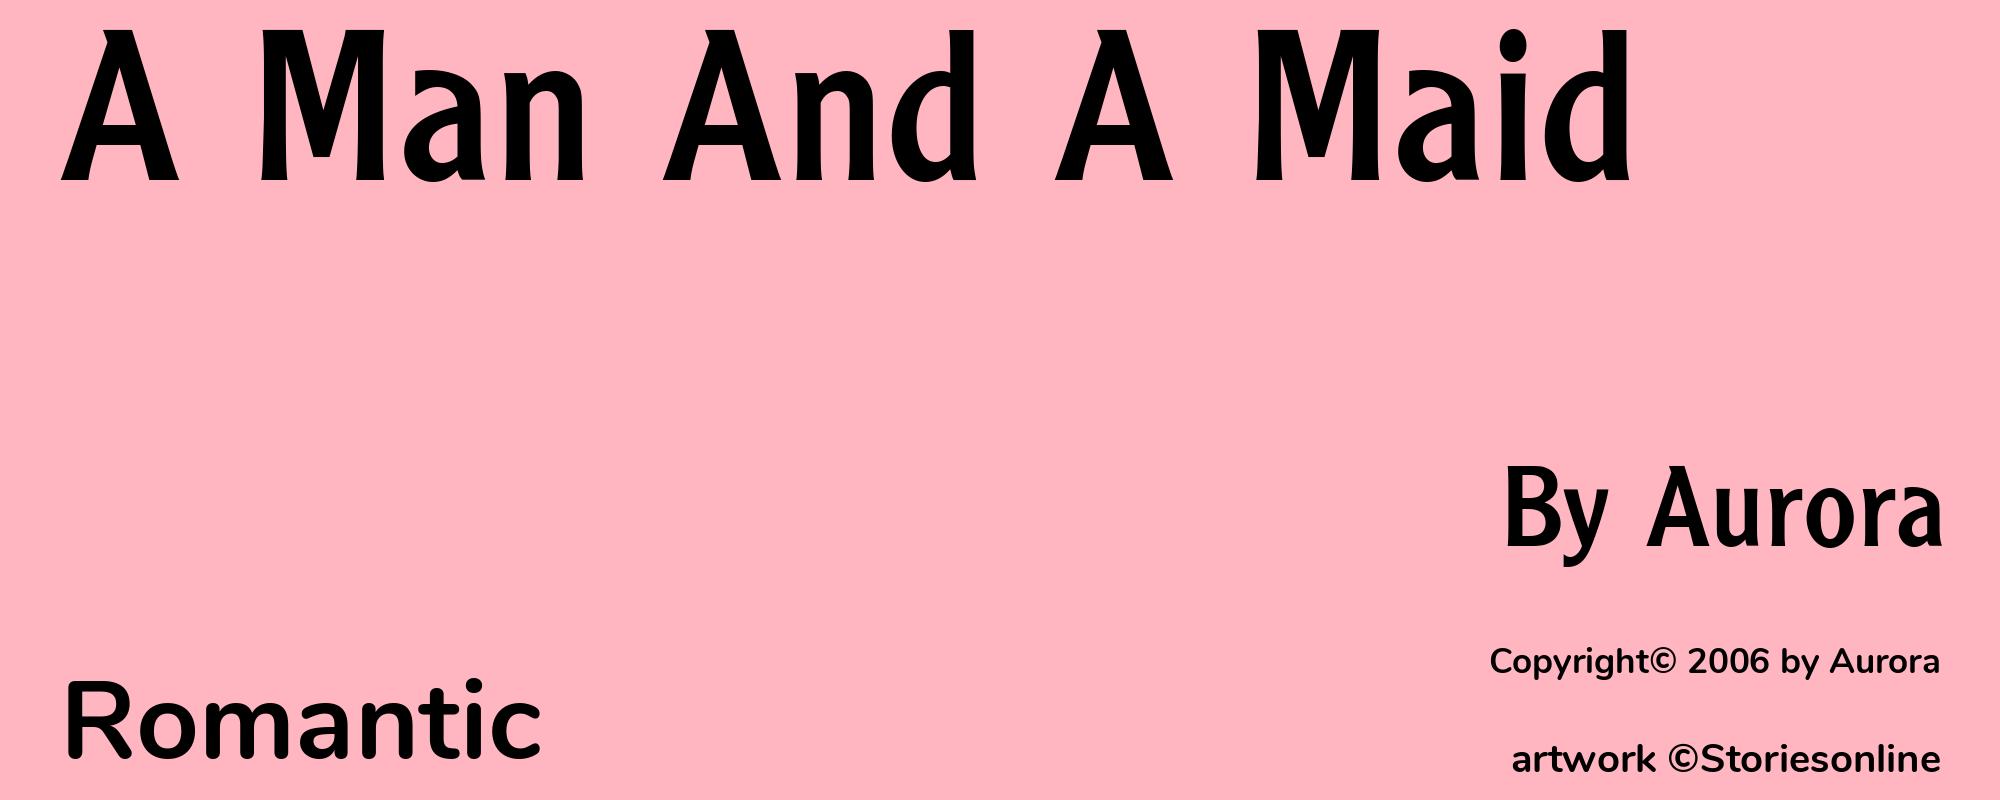 A Man And A Maid - Cover